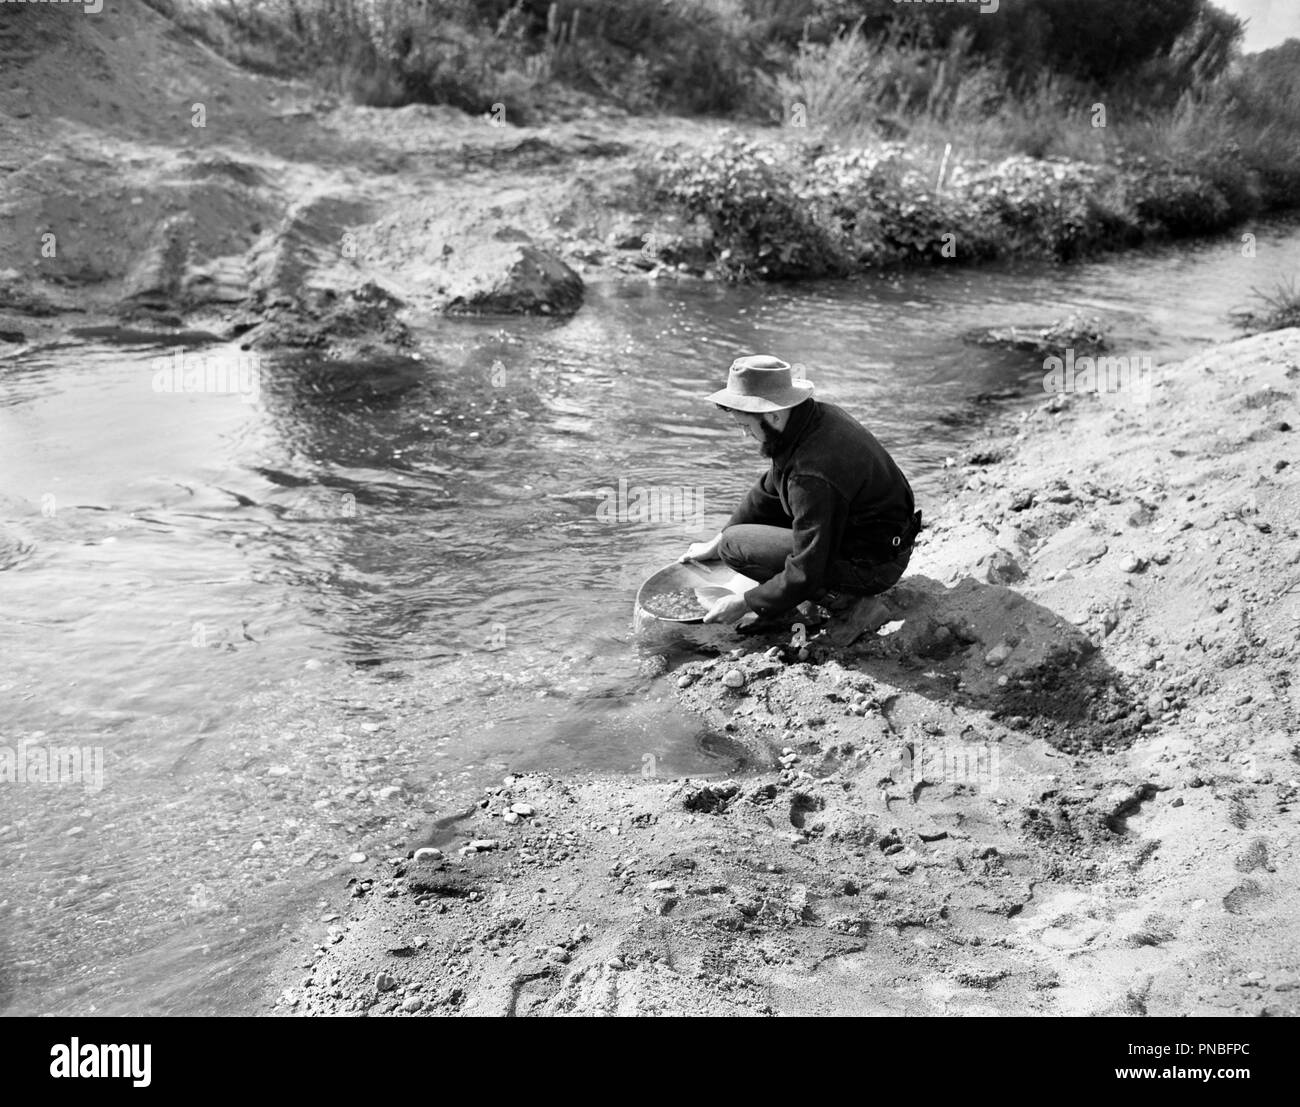 1900s MAN PROSPECTOR PANNING FOR GOLD IN STREAM - ap010254 CAM001 HARS ADVENTURE DISCOVERY PROSPECTOR LUCKY CAM001 MINING OCCUPATIONS GOLD RUSH PANNING SEARCHING GOLD MINE MID-ADULT MAN MOVIE STILL PROSPECTING BLACK AND WHITE CAUCASIAN ETHNICITY CREEK OLD FASHIONED OLD-FASHIONED Stock Photo